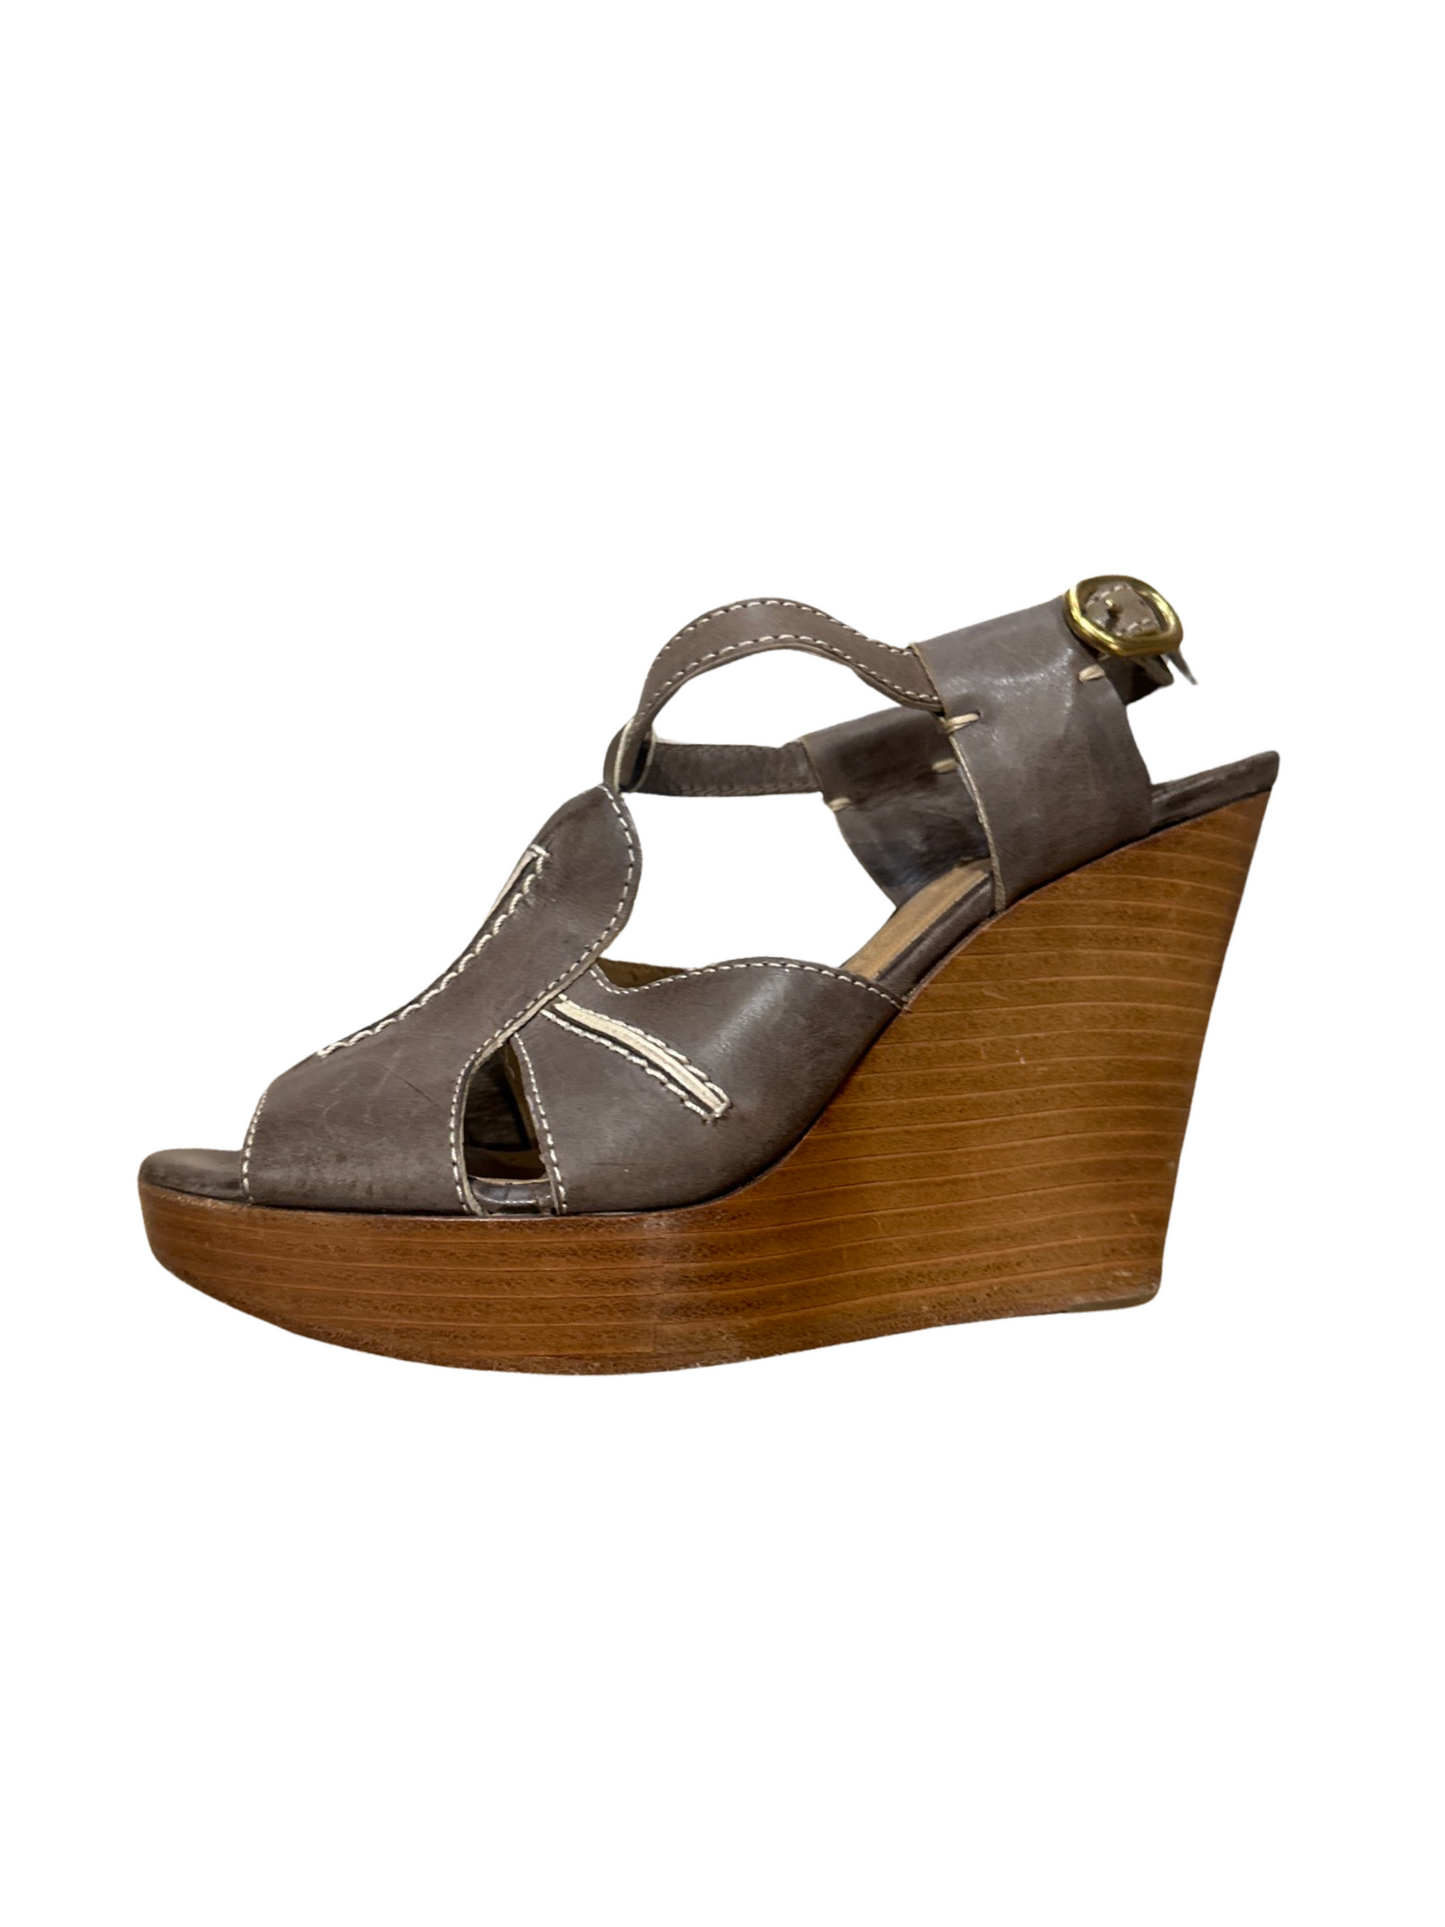 Chloé Leather and wood wedges 36